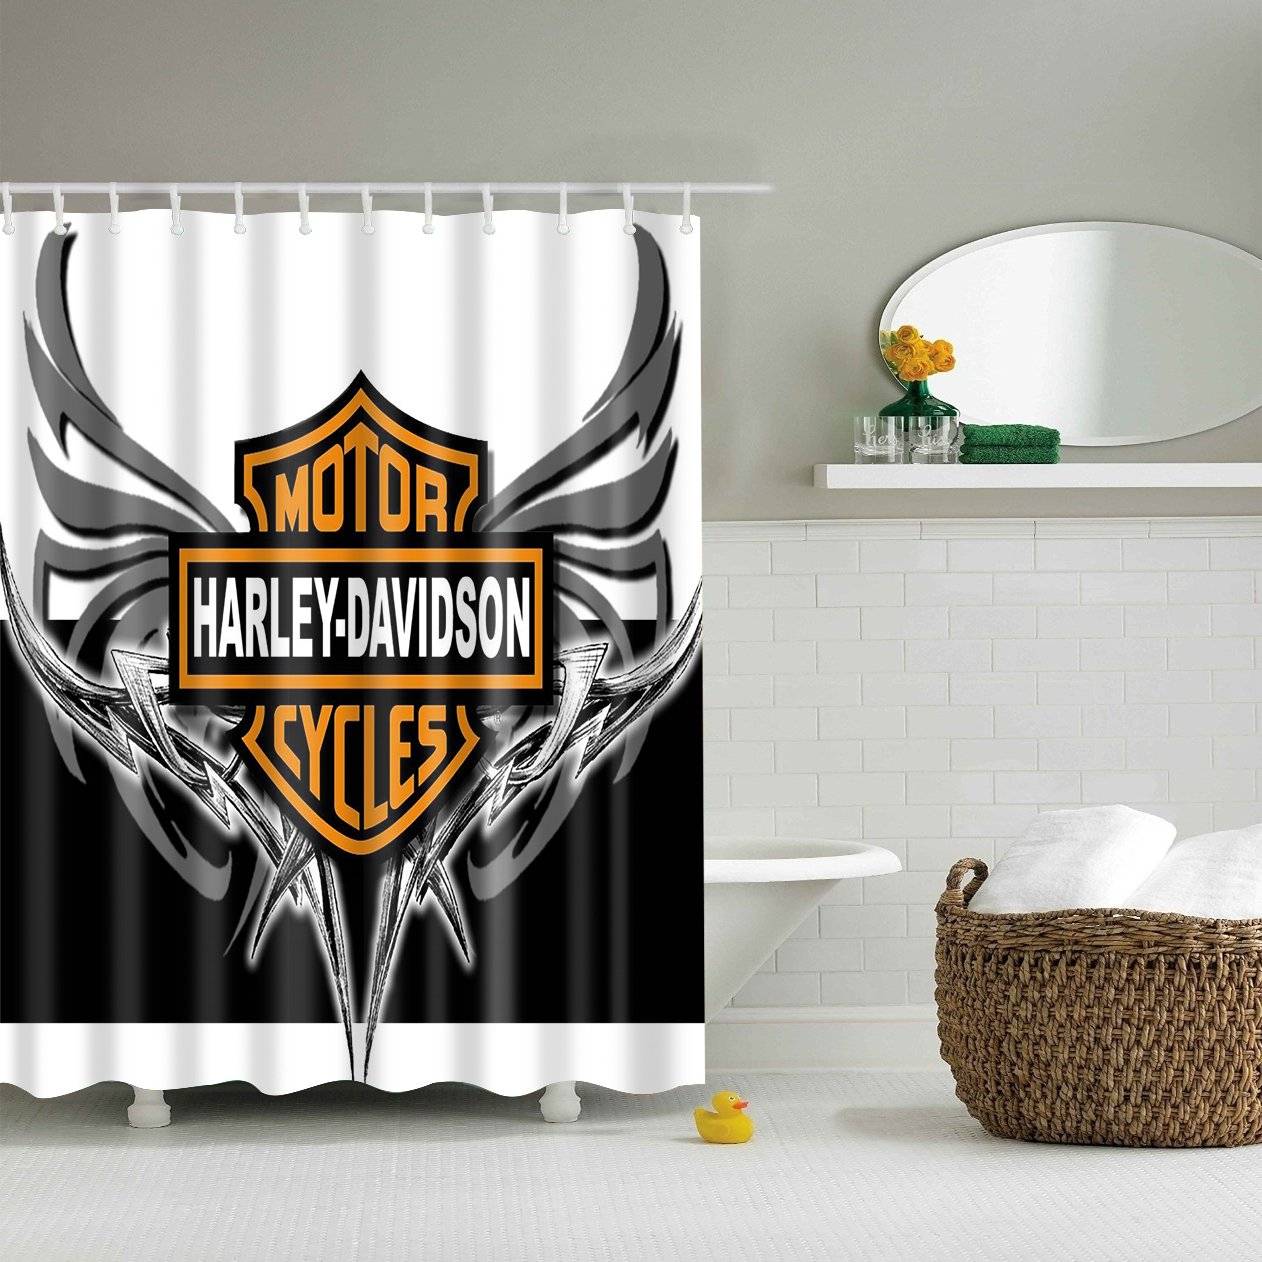 Symbol with Wings Motor Harley Davidson Cycles Shower Curtain